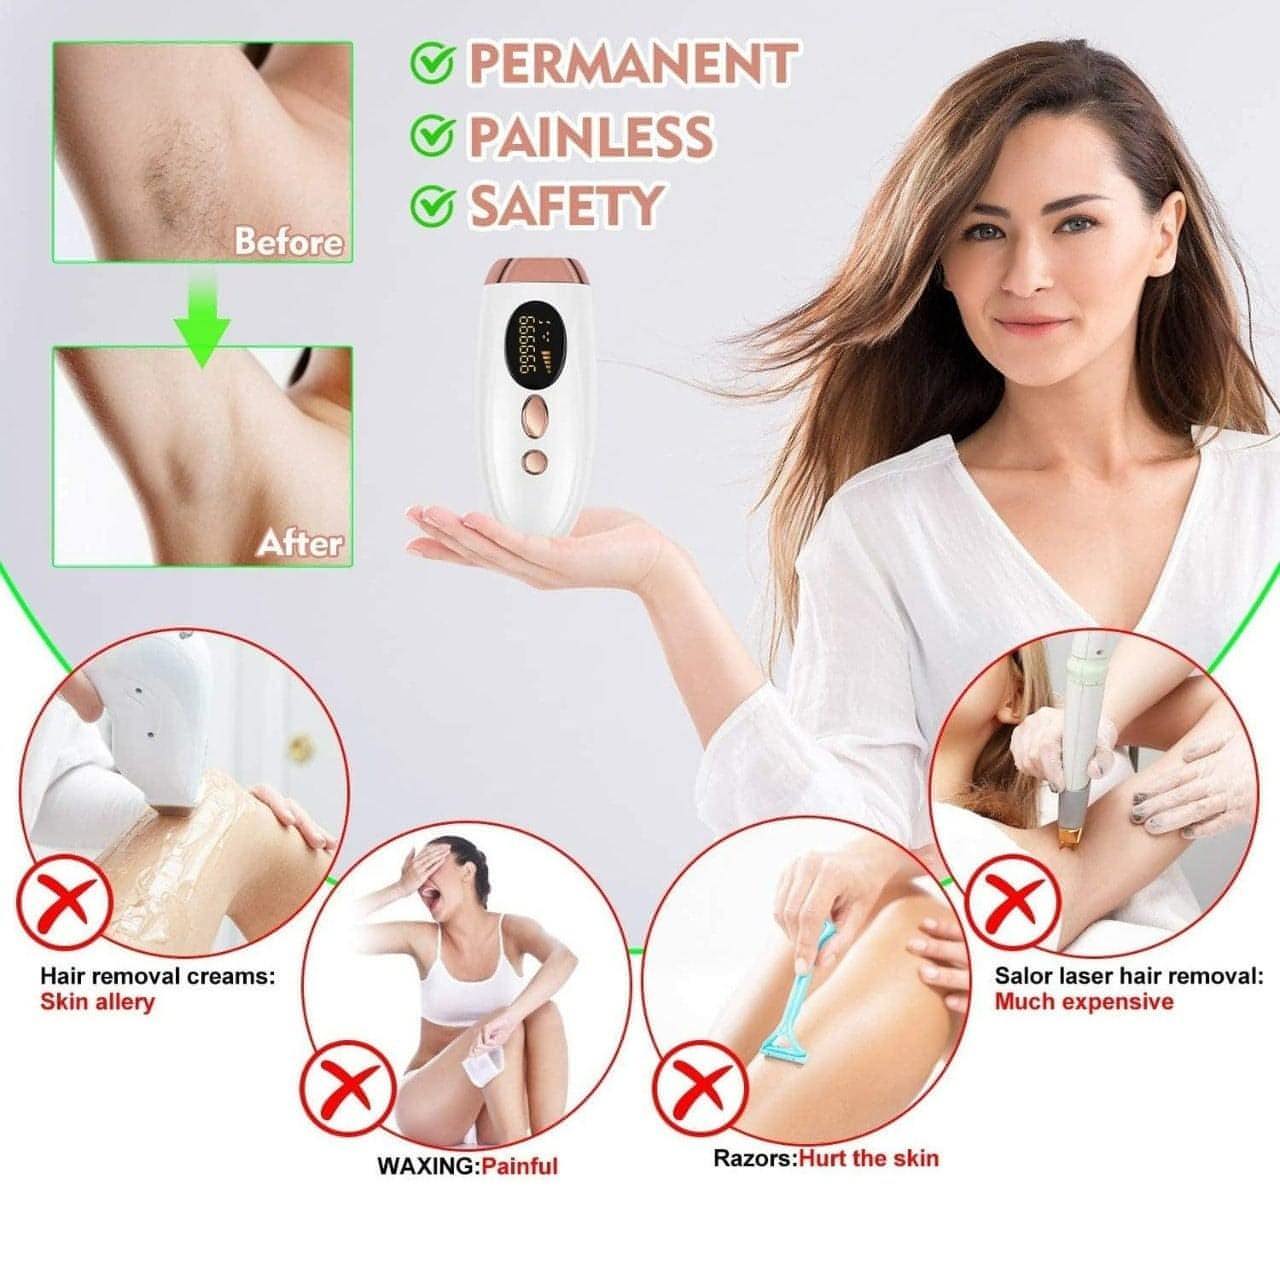 Is IPL Hair Removal Permanent?